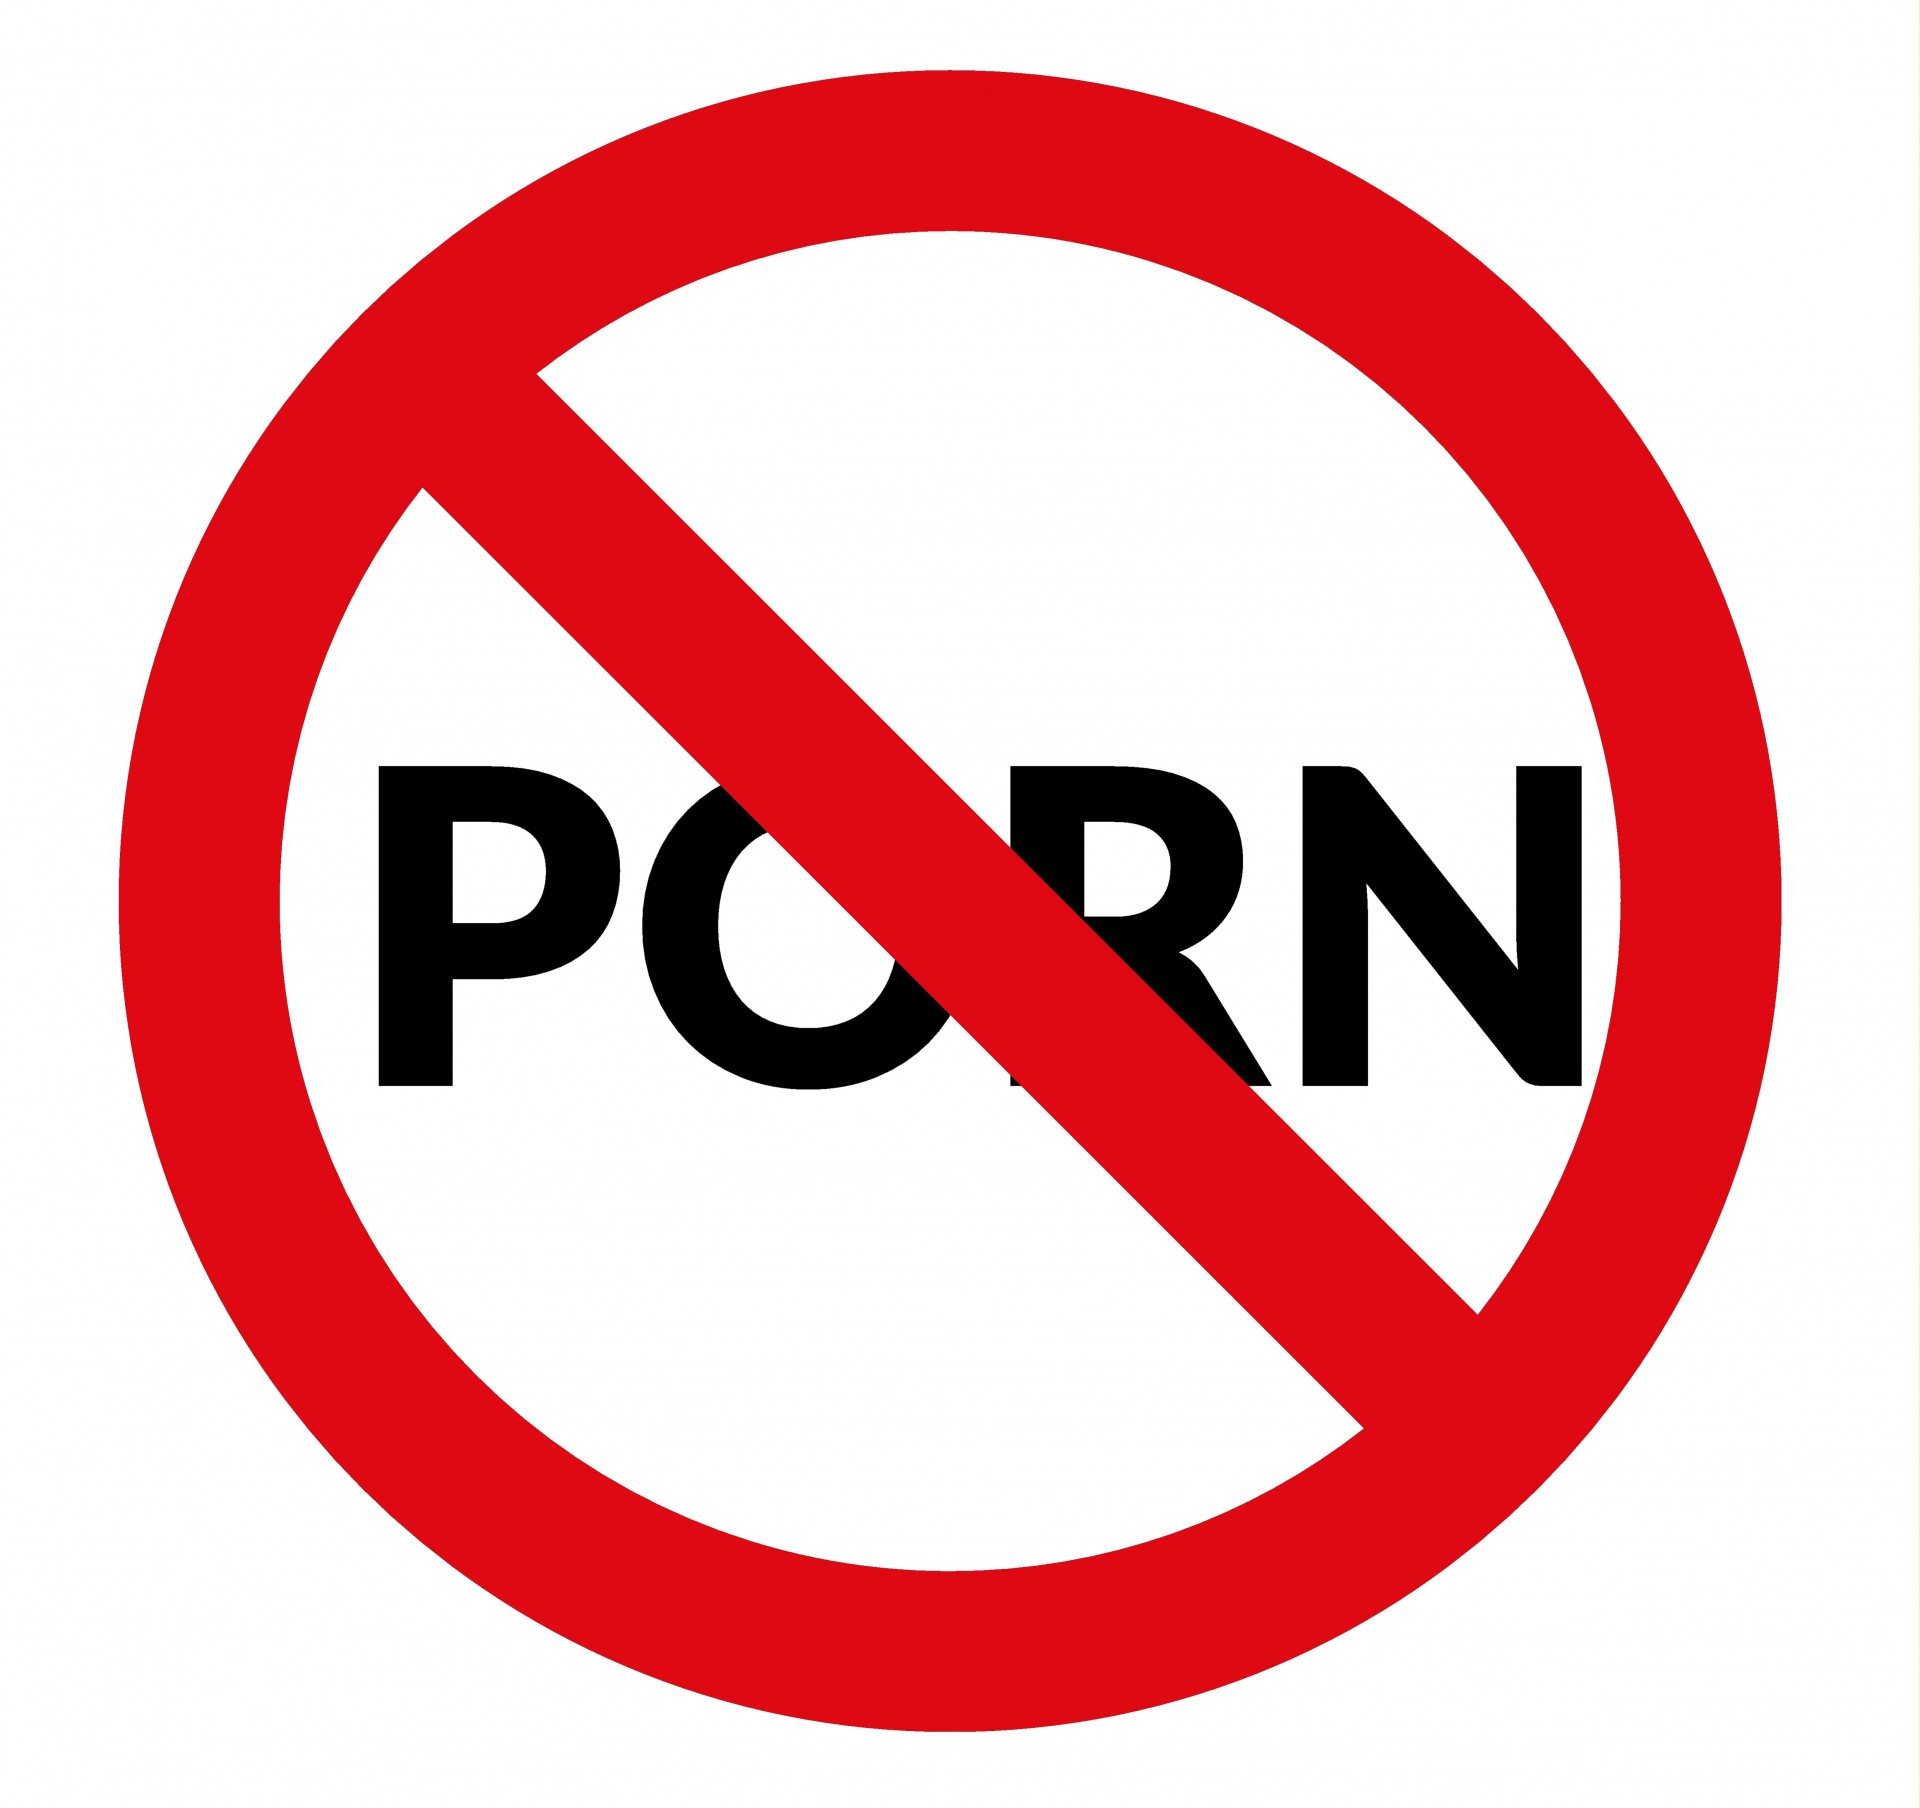 Download free photo of Porn,xxx,warning,sign,red - from needpix.com